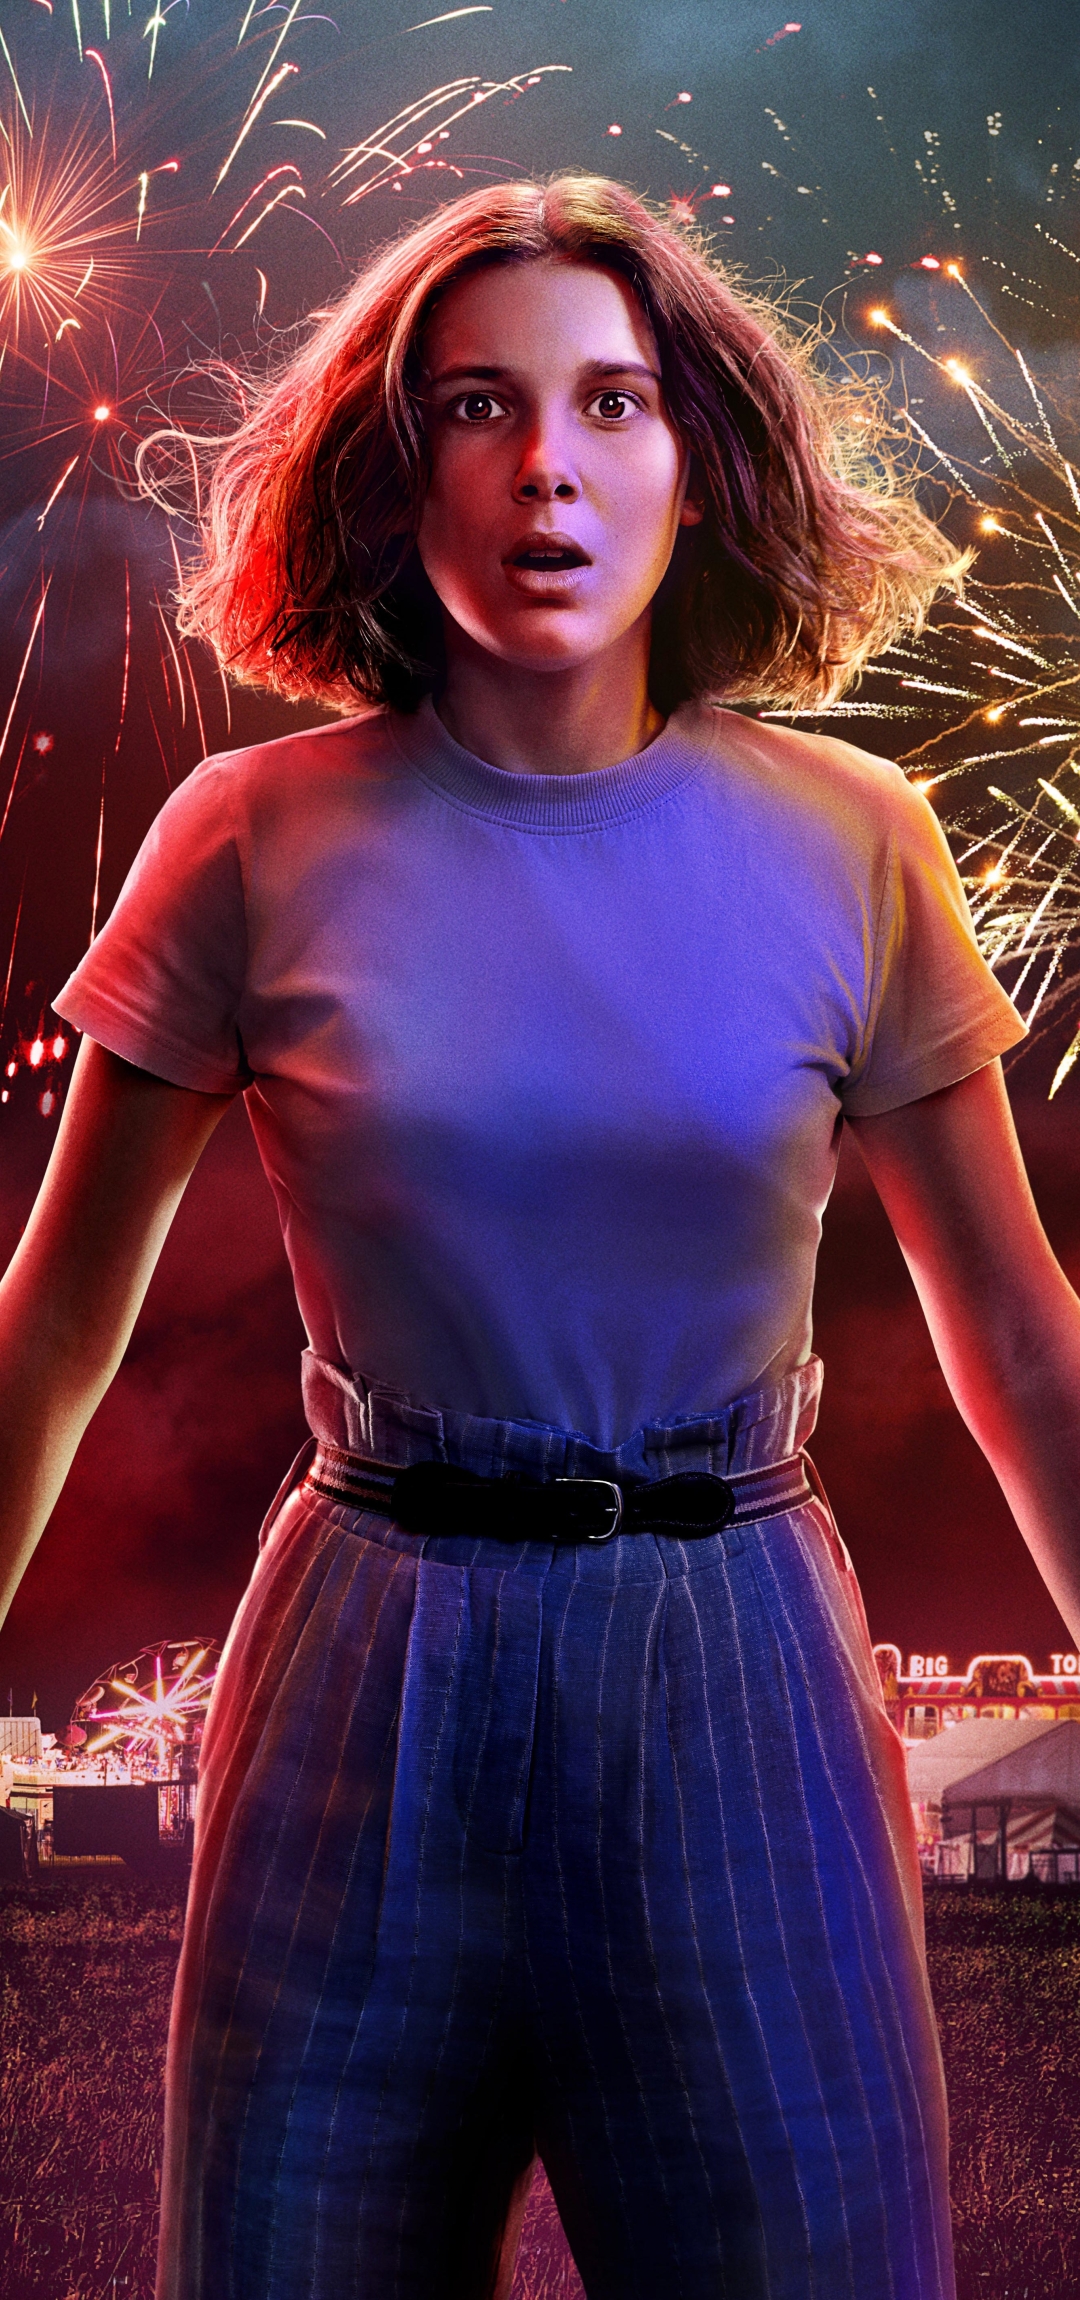 1080x2300 Millie Bobby Brown As Eleven Stranger Things 3 Poster